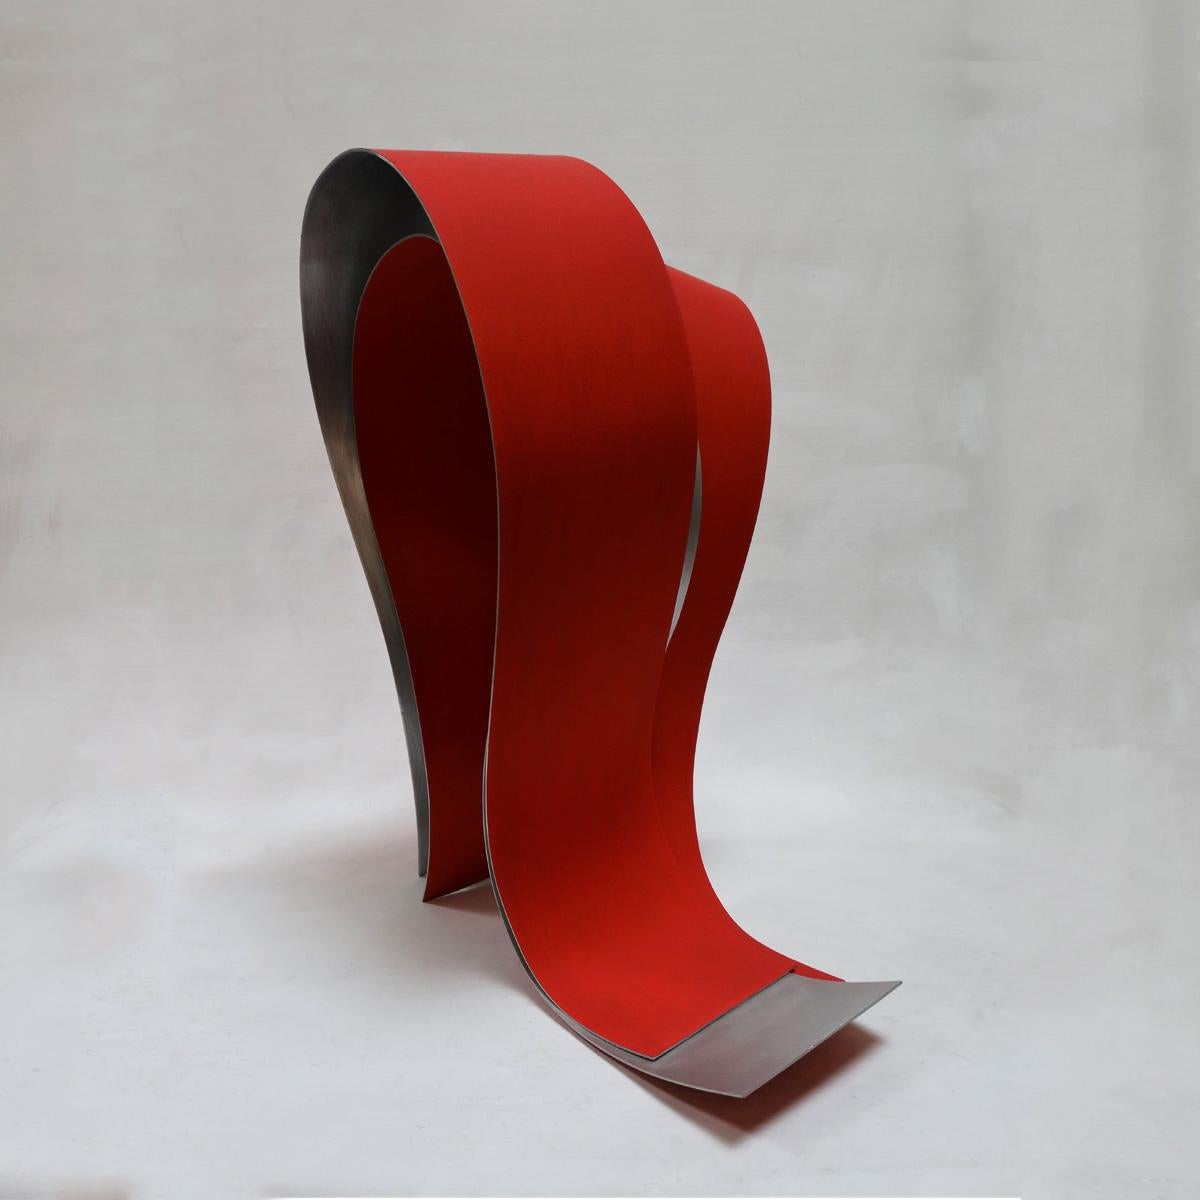 Acull 60 - Abstract, Outdoor Sculpture, Contemporary, Art, Red, Rafael Amorós For Sale 2